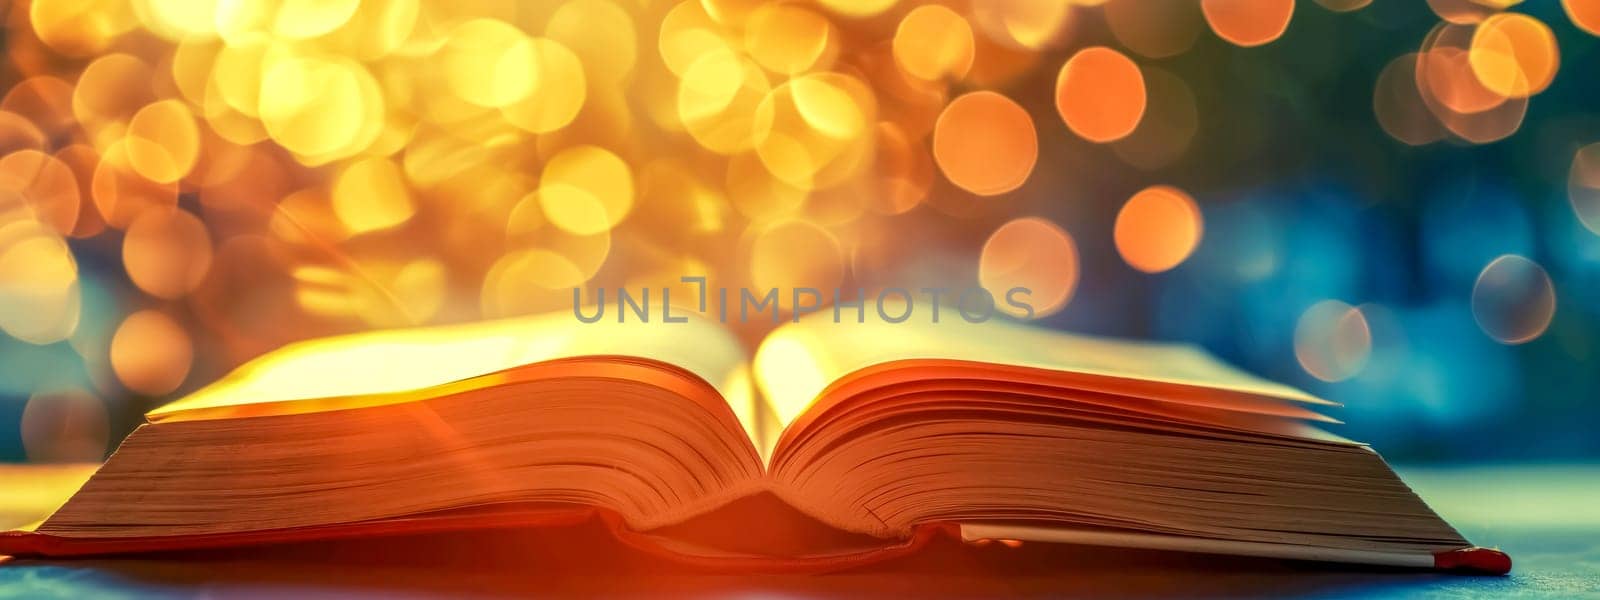 open book lying flat, with its pages spread out, set against a backdrop of warm, blurred lights, cozy and inviting atmosphere, suggesting a sense of warmth, comfort, and the pleasures of reading